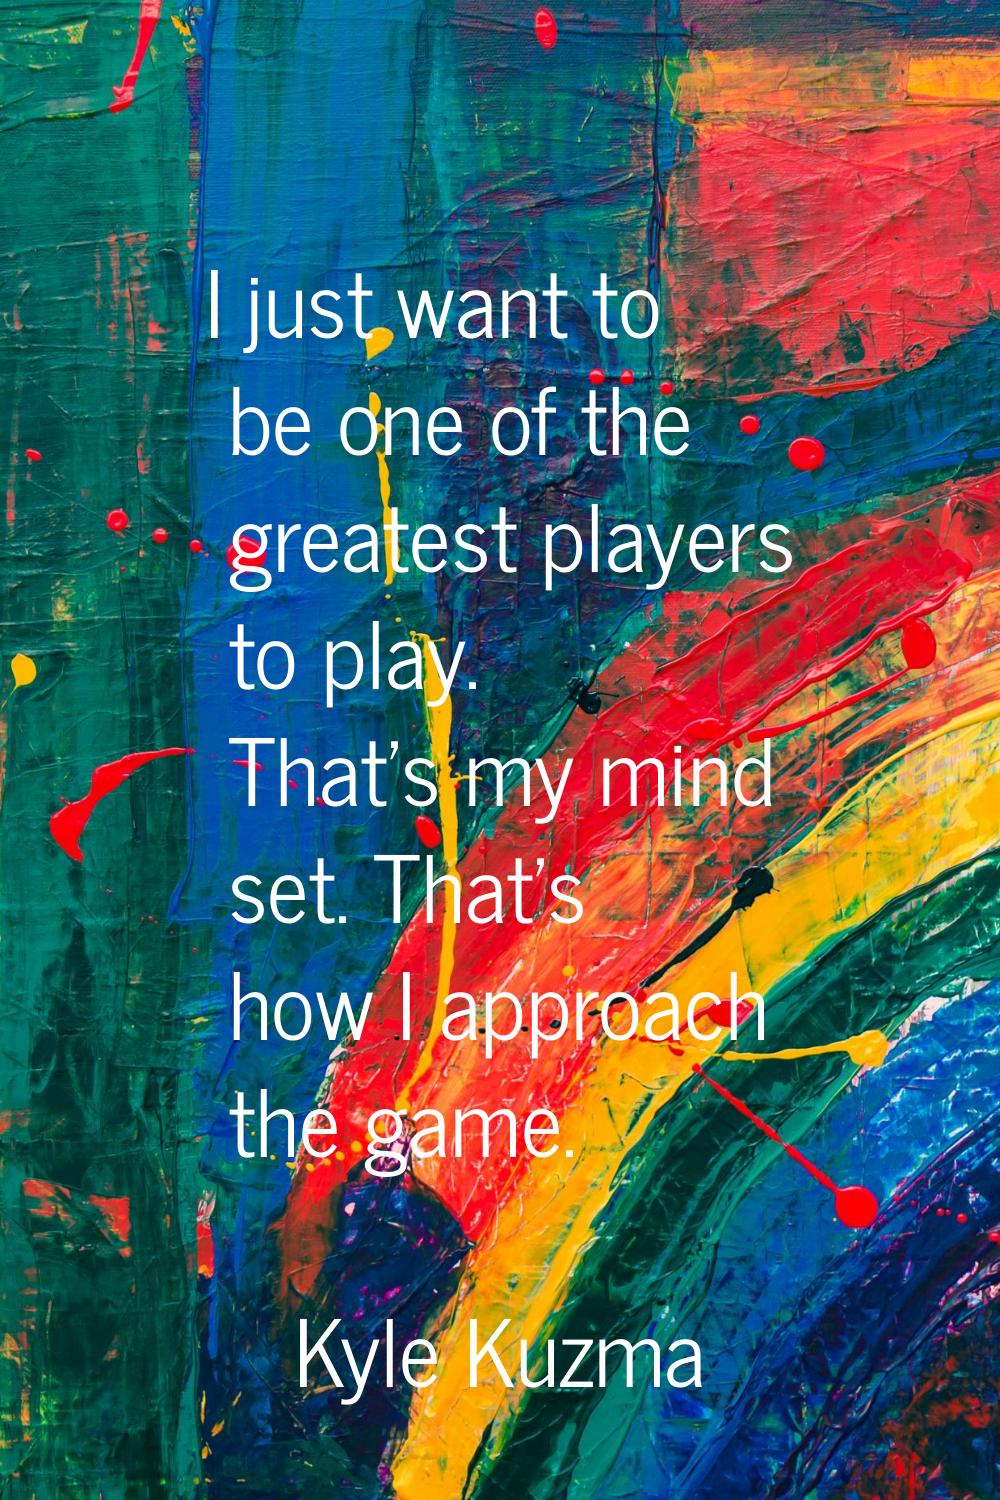 I just want to be one of the greatest players to play. That's my mind set. That's how I approach th